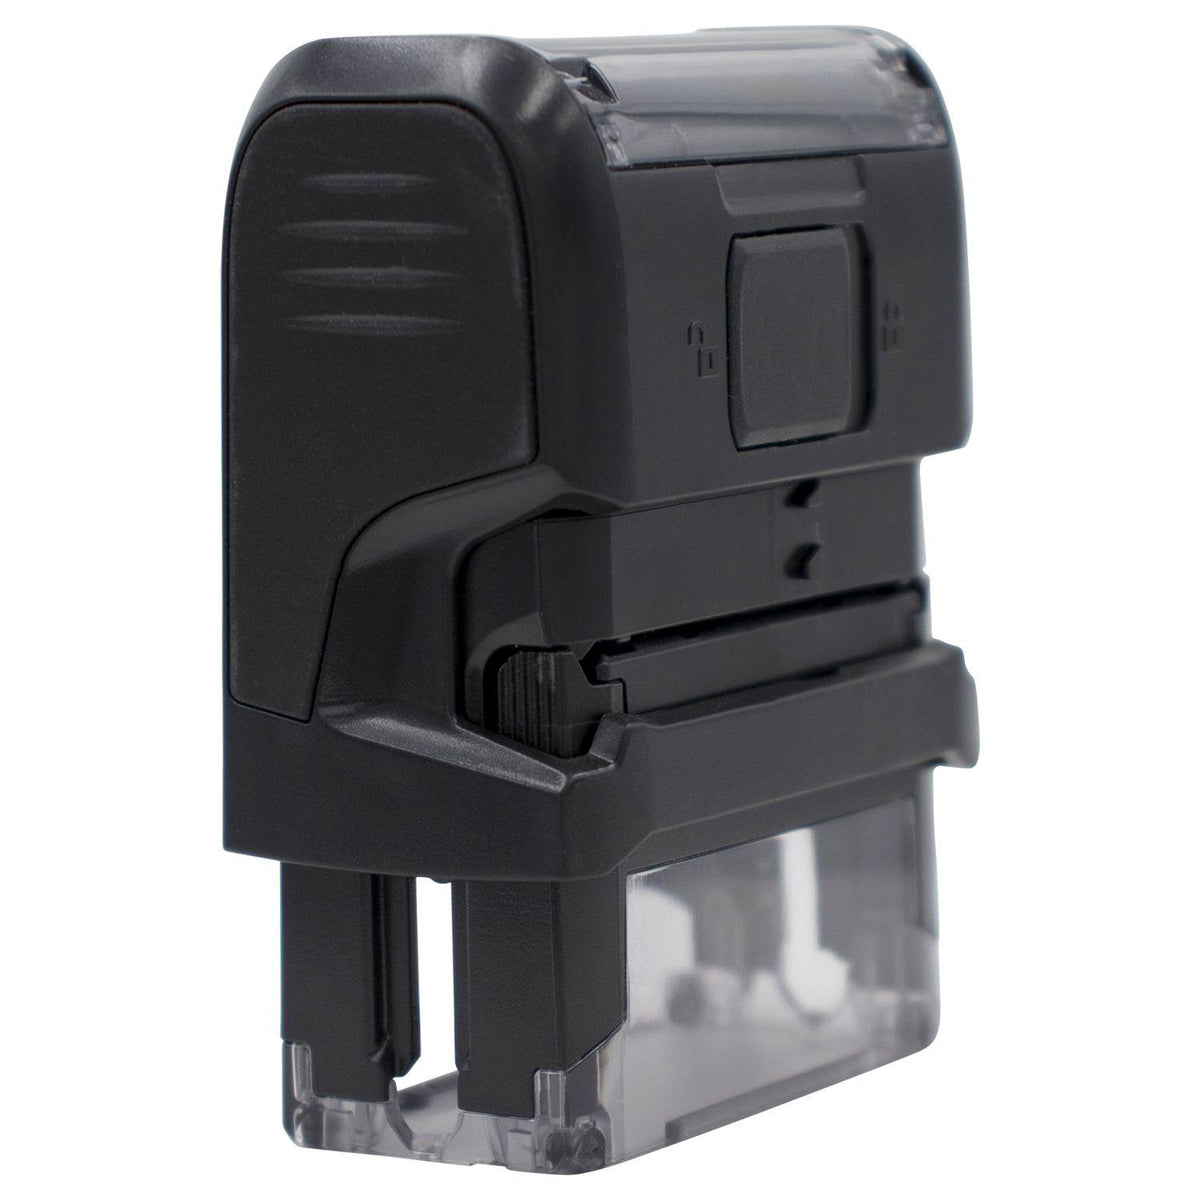 Large Self-Inking Bold Distributed Stamp Back View